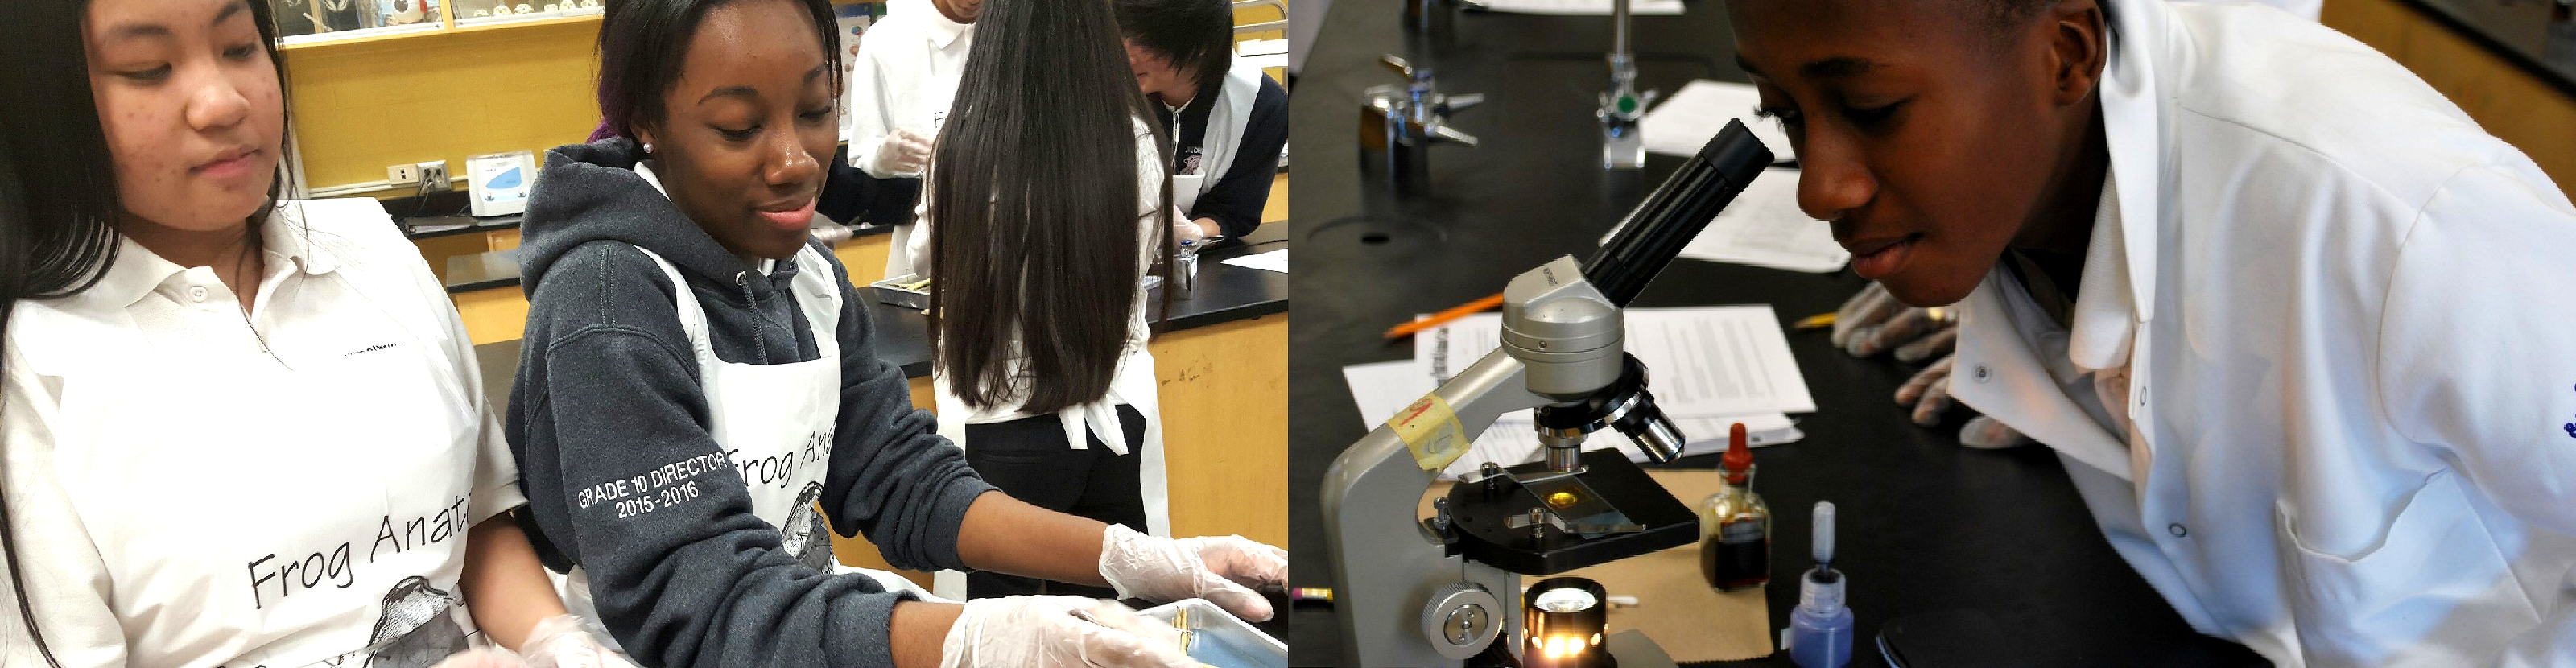 On the left, JCM students in science class. On the right, JCM students looking through microscope.